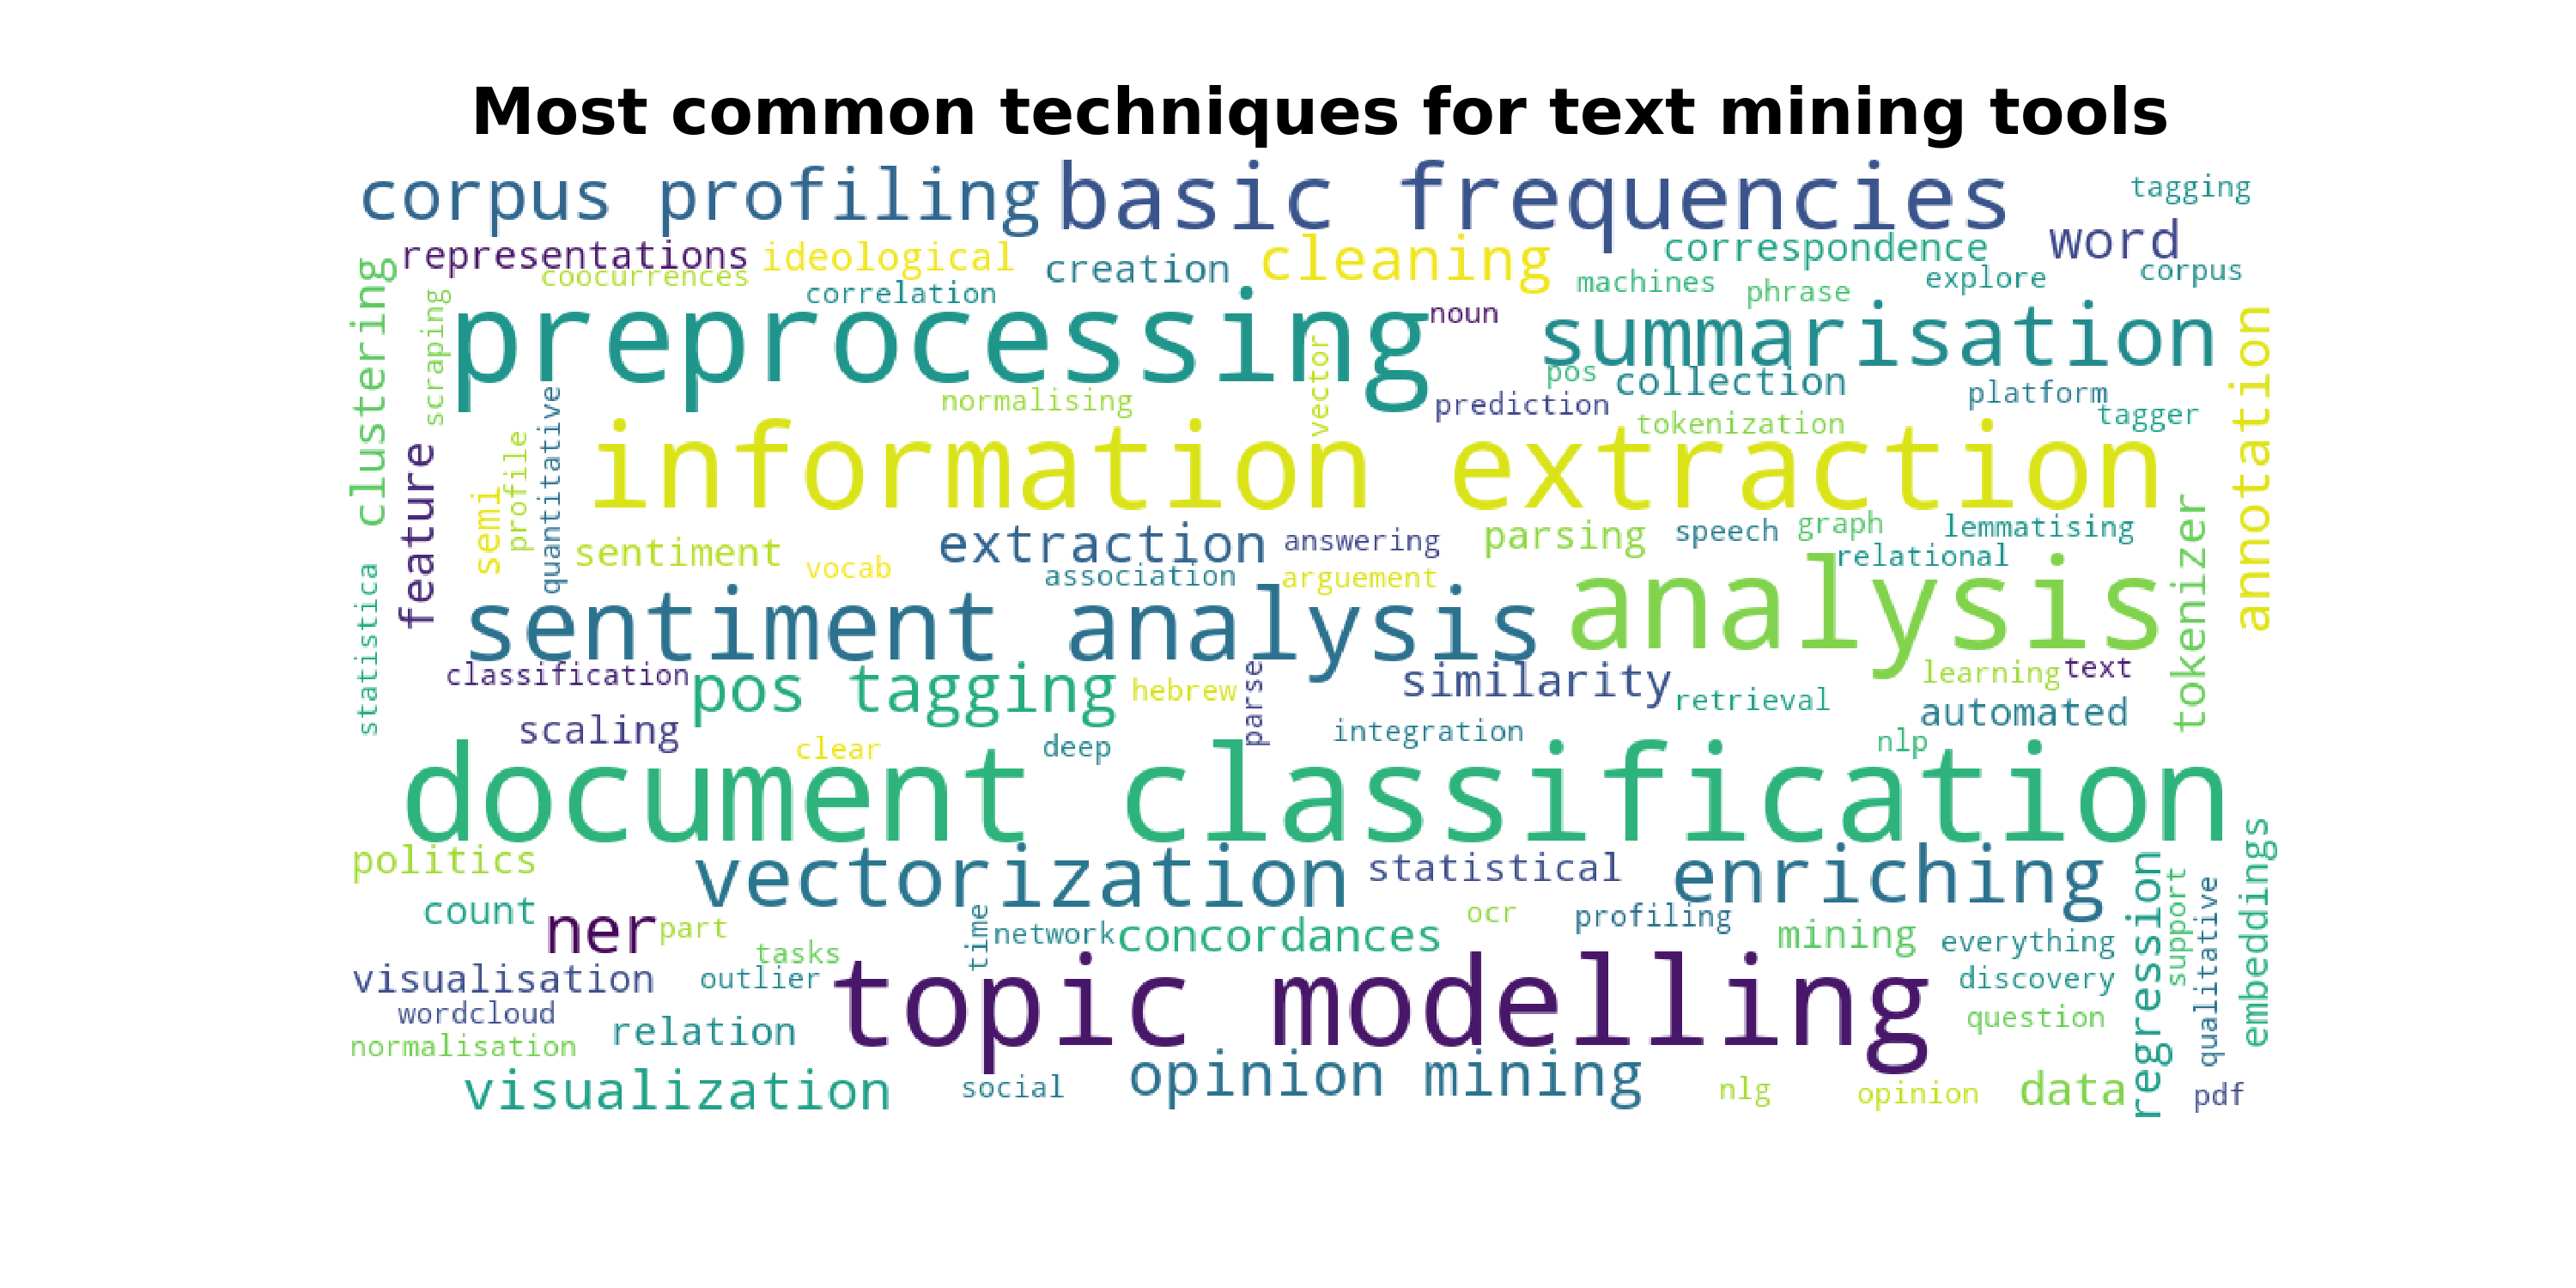 qualitative research using text mining